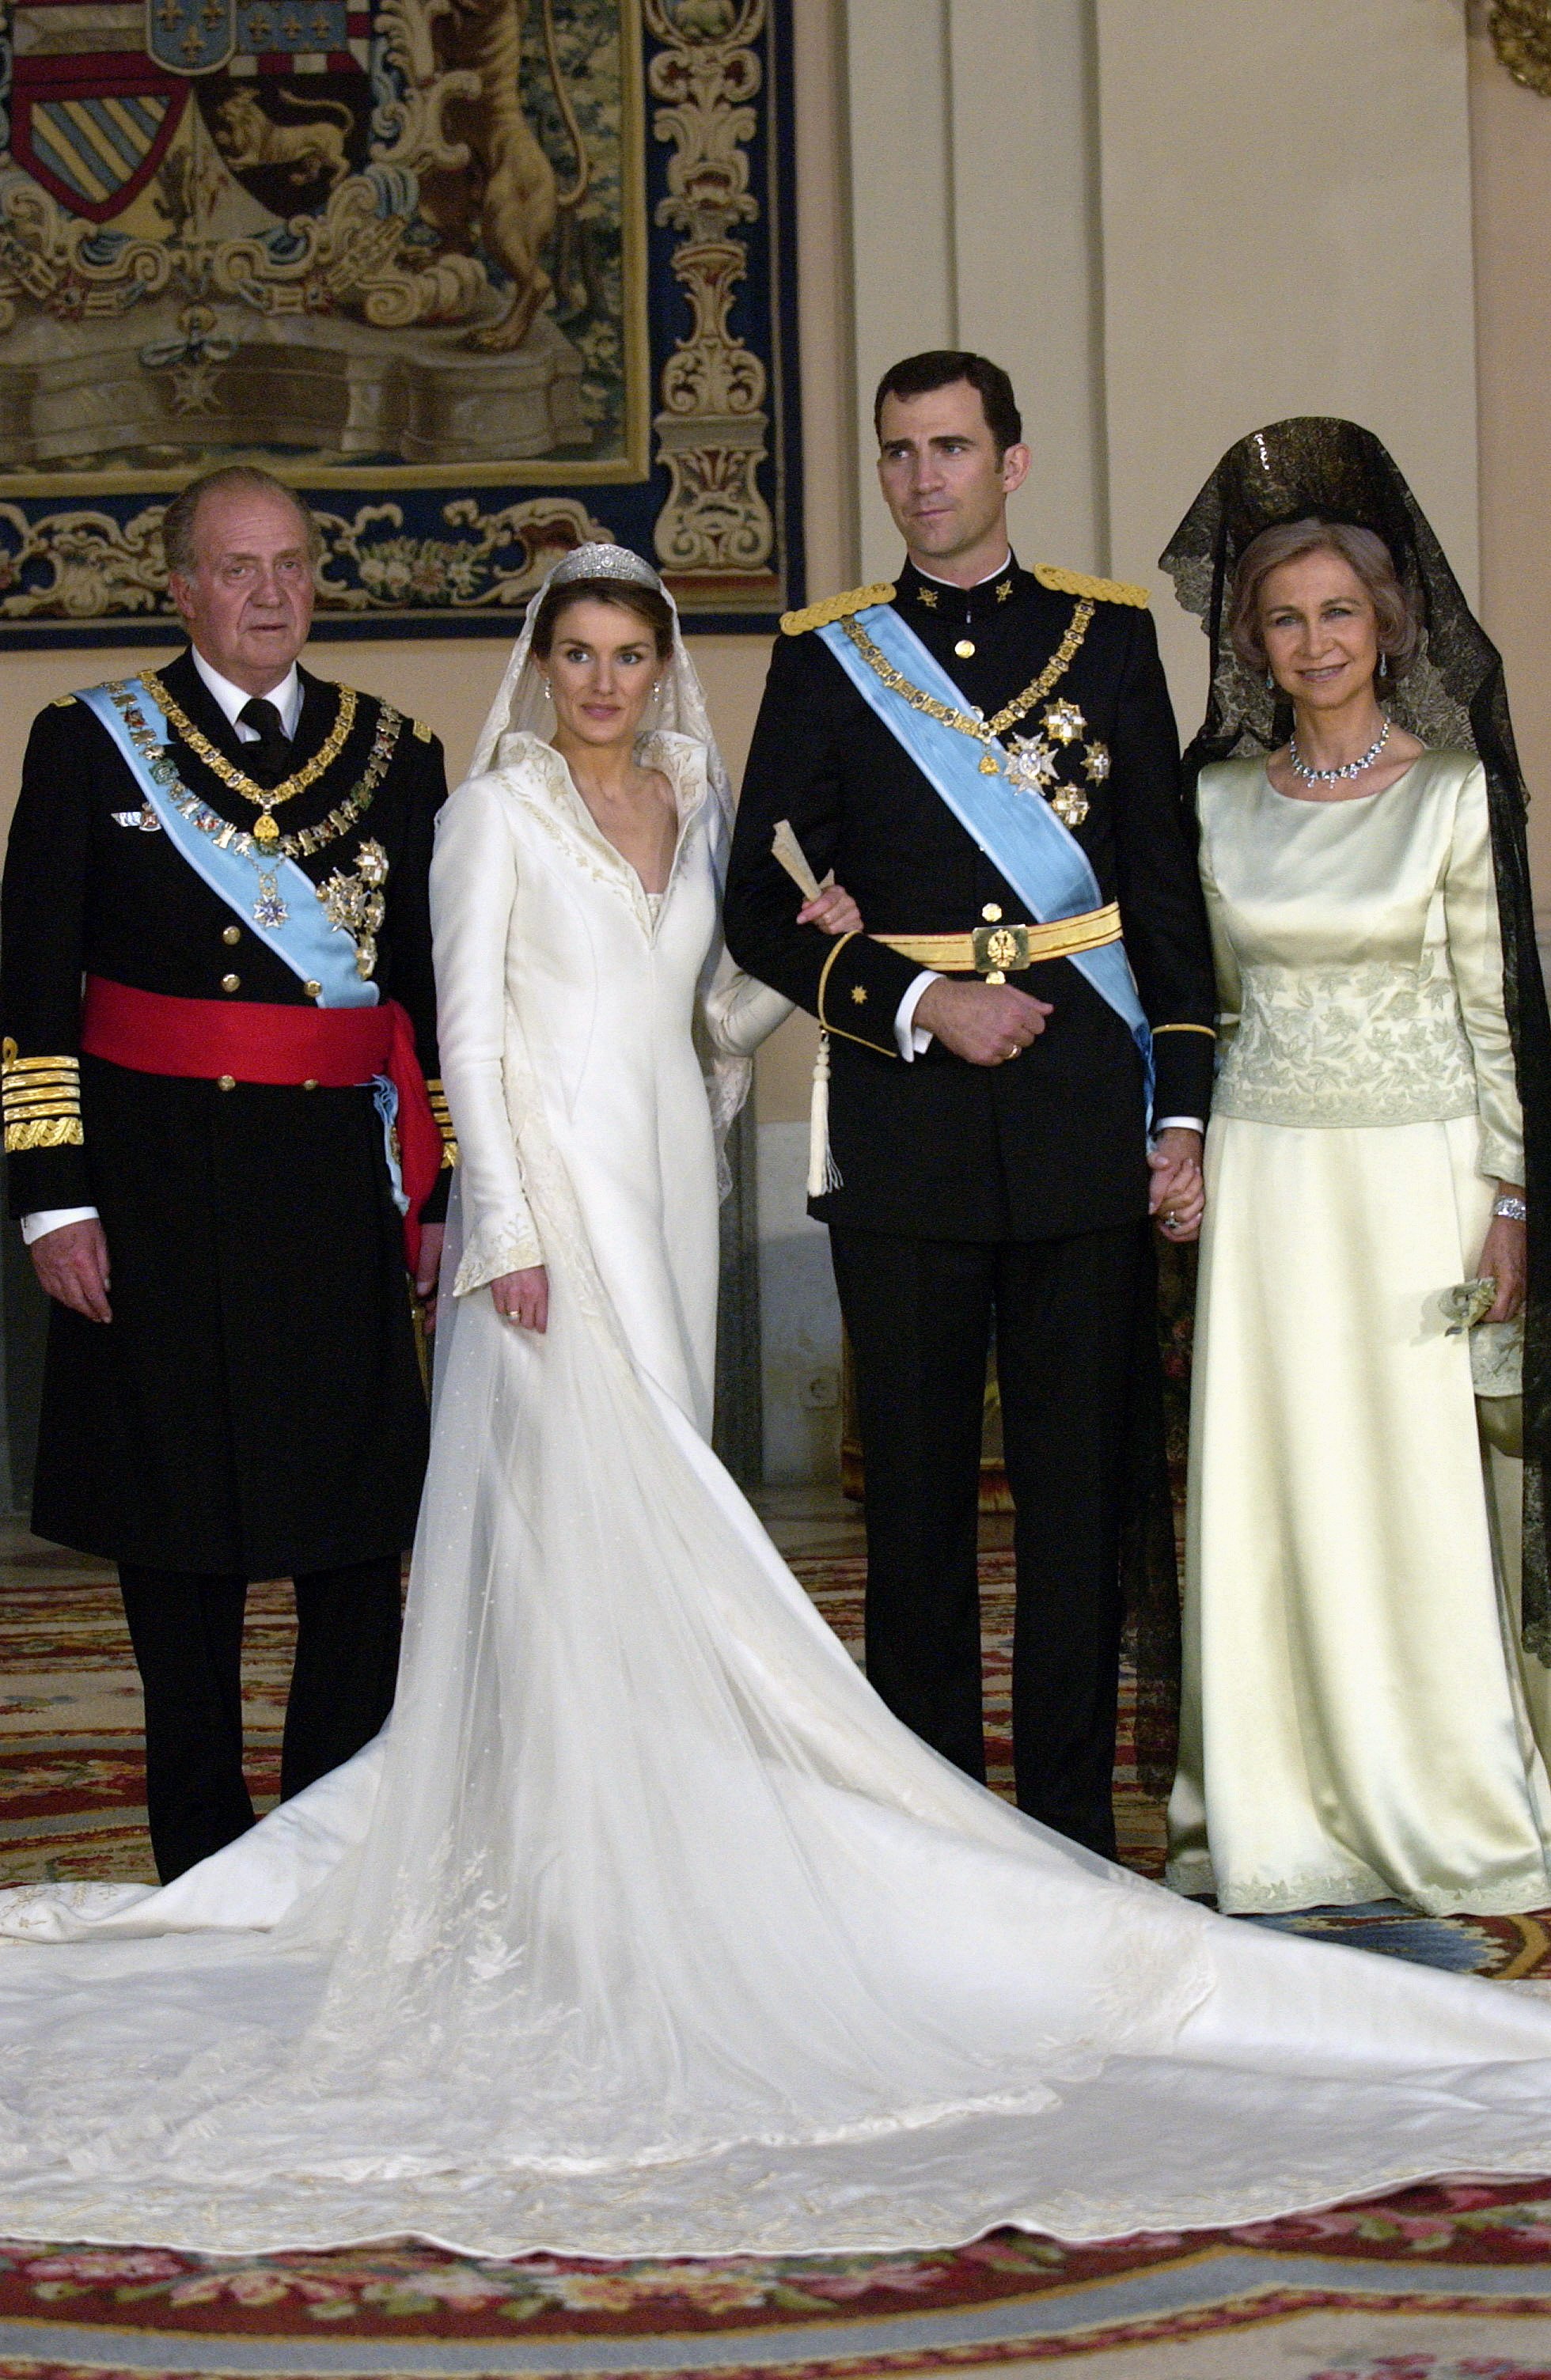 Crown Prince Felipe Of Spain, and His Bride Crown Princess Letizia with his Parents King Juan Carlos Of Spain And Queen Sofia In The Royal Palace. | Source: Getty Images